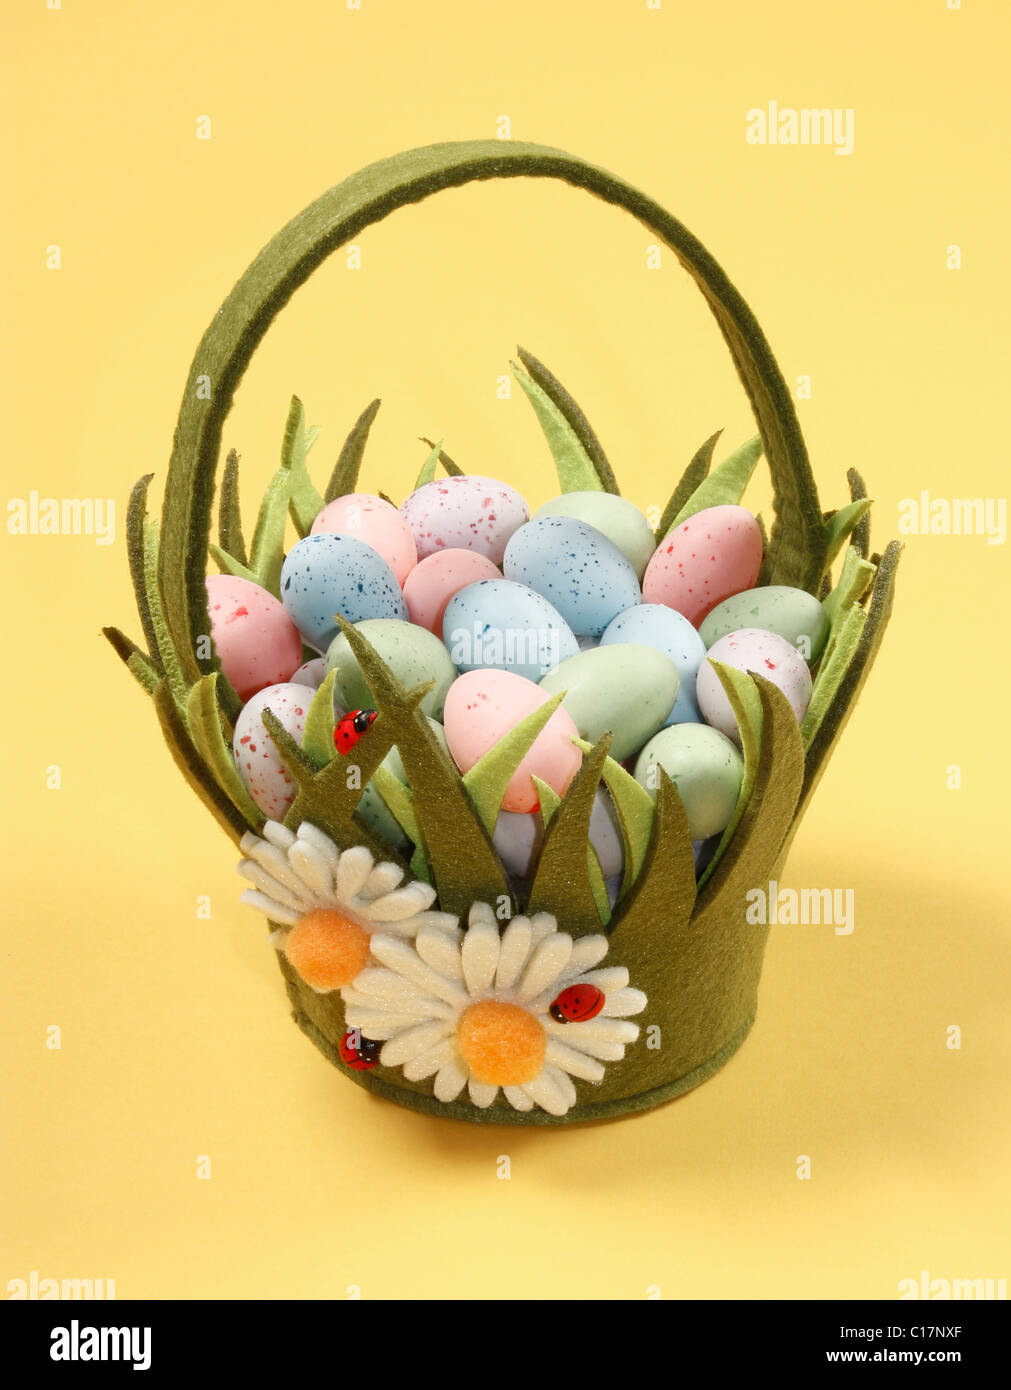 Green Easter Basket with Eggs on Yellow Background. Stock Photo